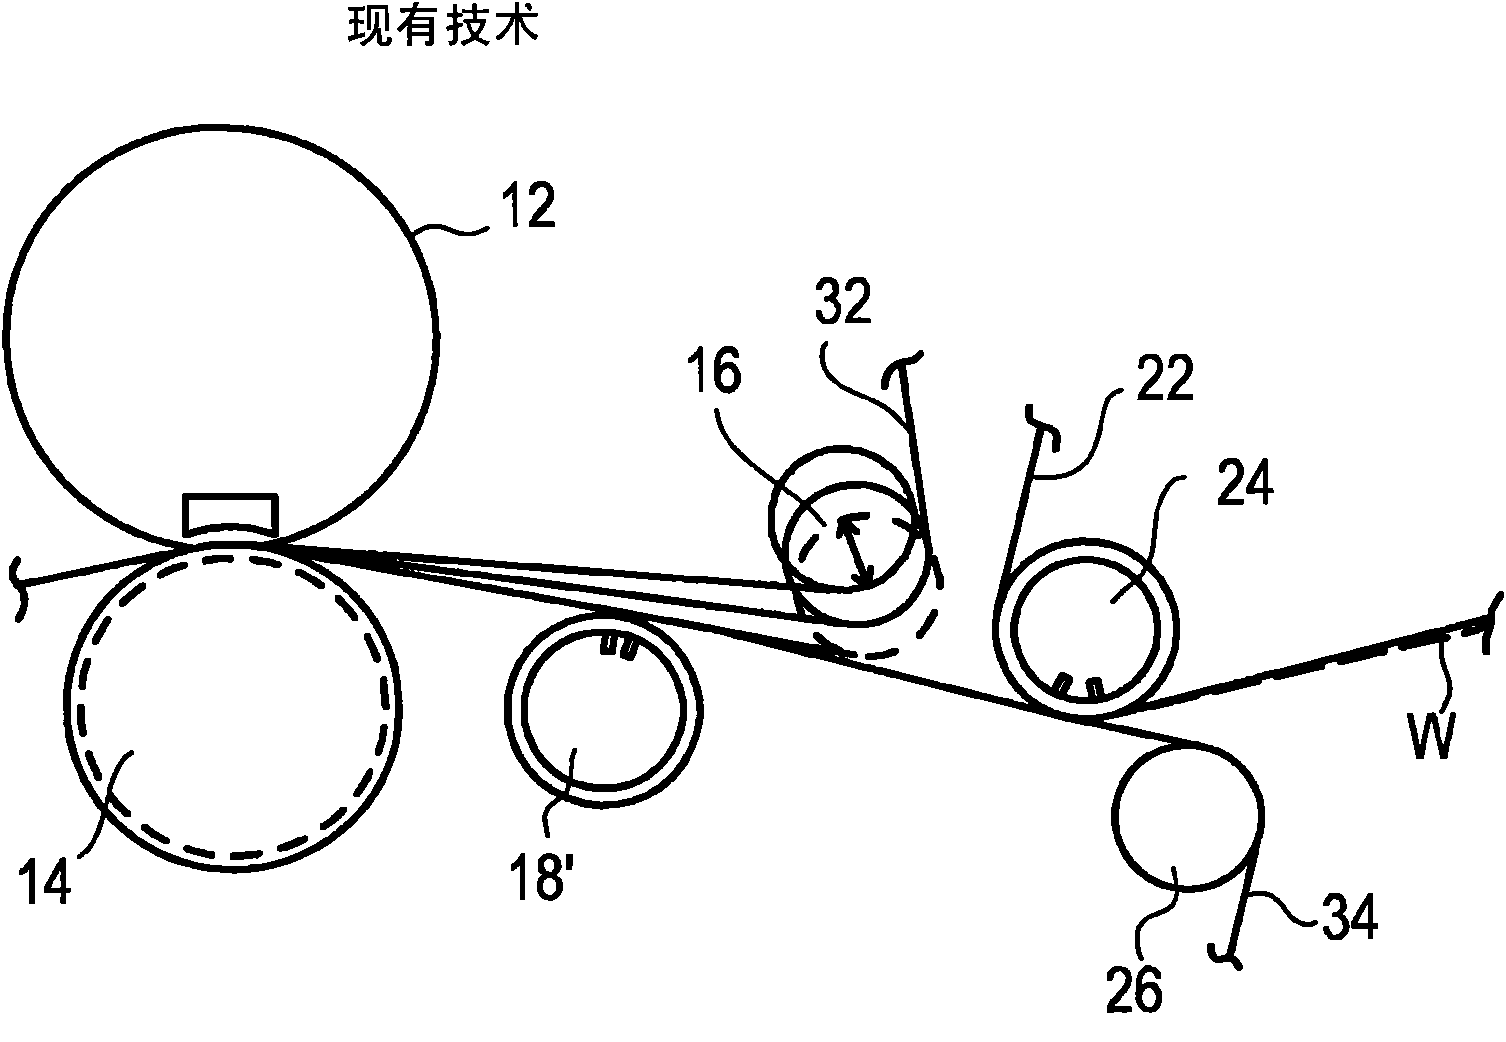 Method and apparatus for transferring fiber web from a support fabric to another